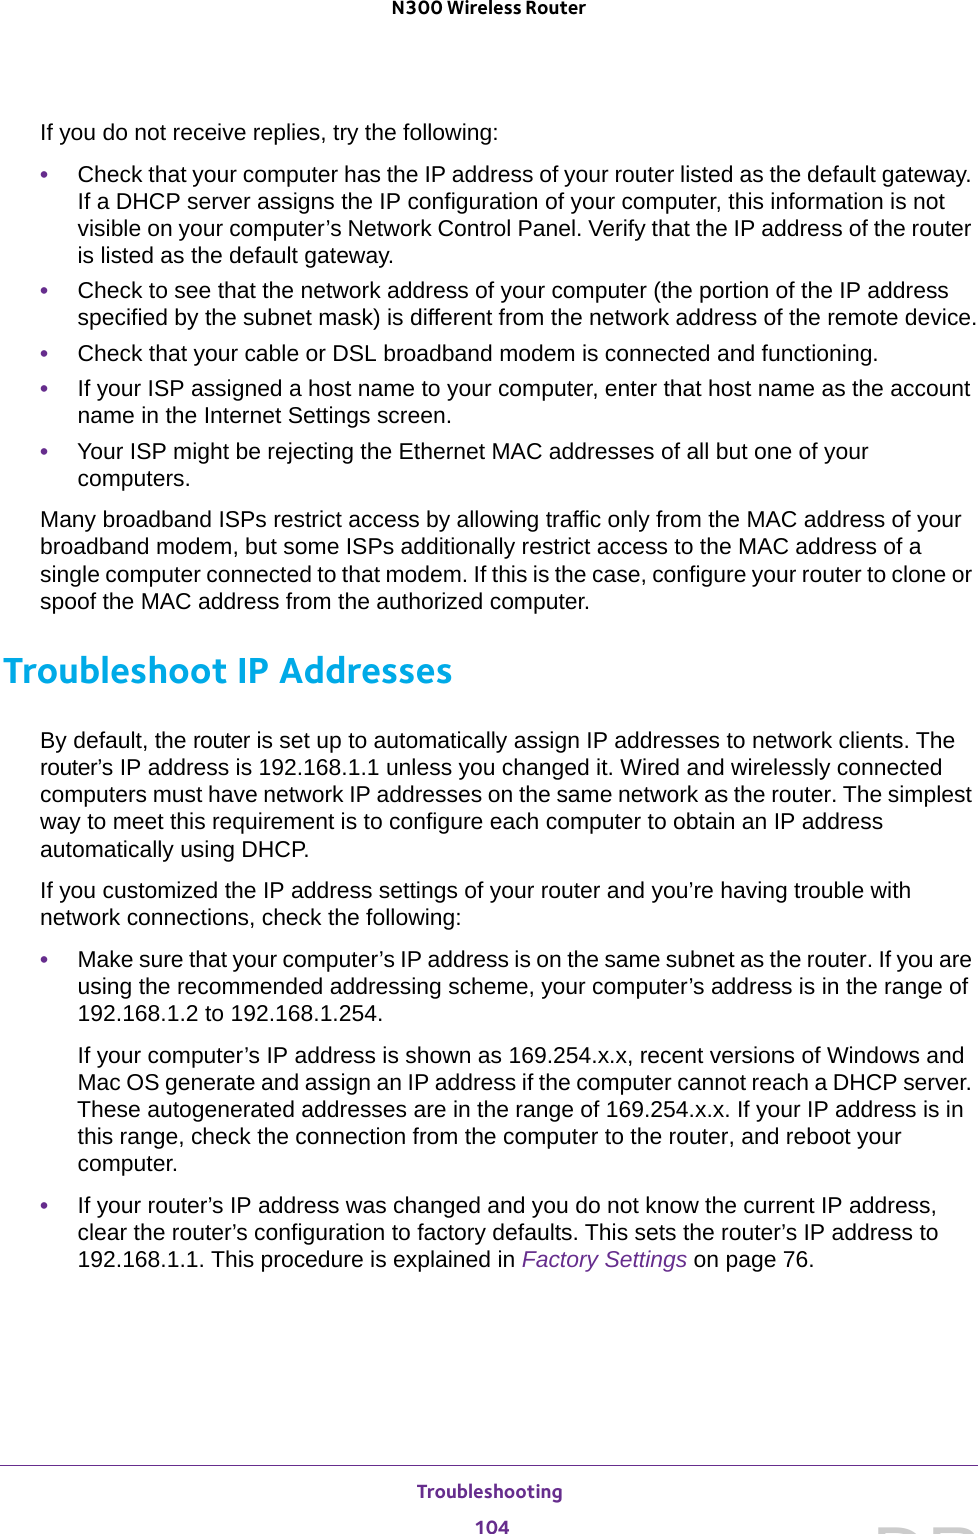 Troubleshooting 104N300 Wireless Router If you do not receive replies, try the following:•Check that your computer has the IP address of your router listed as the default gateway. If a DHCP server assigns the IP configuration of your computer, this information is not visible on your computer’s Network Control Panel. Verify that the IP address of the router is listed as the default gateway.•Check to see that the network address of your computer (the portion of the IP address specified by the subnet mask) is different from the network address of the remote device.•Check that your cable or DSL broadband modem is connected and functioning.•If your ISP assigned a host name to your computer, enter that host name as the account name in the Internet Settings screen.•Your ISP might be rejecting the Ethernet MAC addresses of all but one of your computers.Many broadband ISPs restrict access by allowing traffic only from the MAC address of your broadband modem, but some ISPs additionally restrict access to the MAC address of a single computer connected to that modem. If this is the case, configure your router to clone or spoof the MAC address from the authorized computer. Troubleshoot IP AddressesBy default, the router is set up to automatically assign IP addresses to network clients. The router’s IP address is 192.168.1.1 unless you changed it. Wired and wirelessly connected computers must have network IP addresses on the same network as the router. The simplest way to meet this requirement is to configure each computer to obtain an IP address automatically using DHCP. If you customized the IP address settings of your router and you’re having trouble with network connections, check the following:•Make sure that your computer’s IP address is on the same subnet as the router. If you are using the recommended addressing scheme, your computer’s address is in the range of 192.168.1.2 to 192.168.1.254. If your computer’s IP address is shown as 169.254.x.x, recent versions of Windows and Mac OS generate and assign an IP address if the computer cannot reach a DHCP server. These autogenerated addresses are in the range of 169.254.x.x. If your IP address is in this range, check the connection from the computer to the router, and reboot your computer.•If your router’s IP address was changed and you do not know the current IP address, clear the router’s configuration to factory defaults. This sets the router’s IP address to 192.168.1.1. This procedure is explained in Factory Settings on page  76.DRAFT